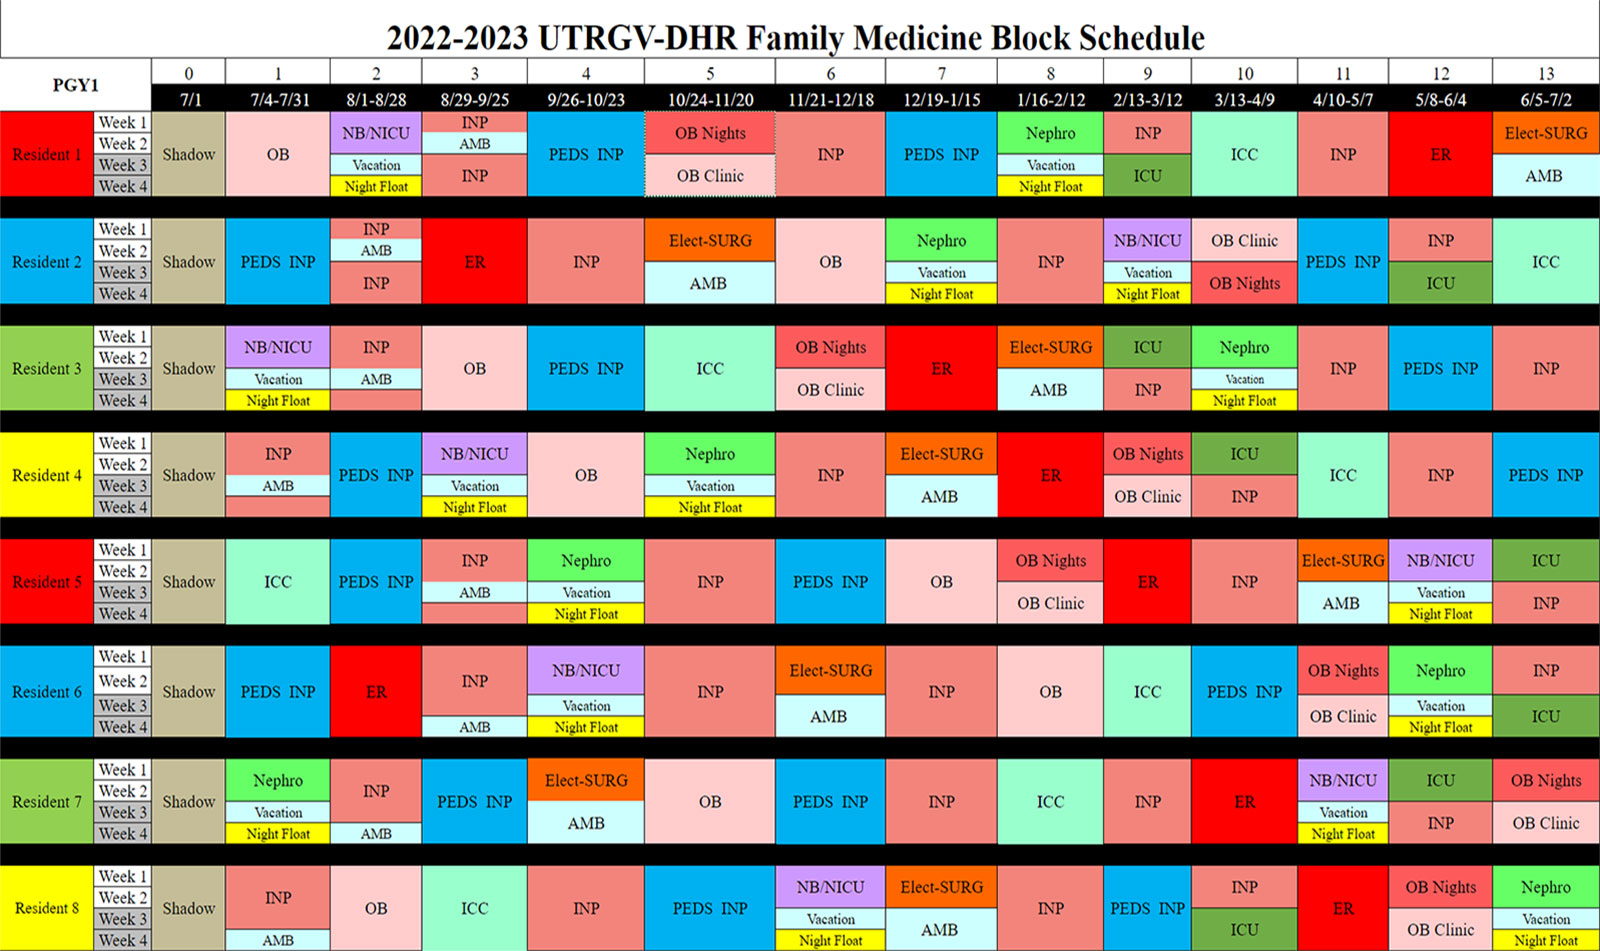 PGY1 Block Schedule: Download Excel document in link above for detailed information